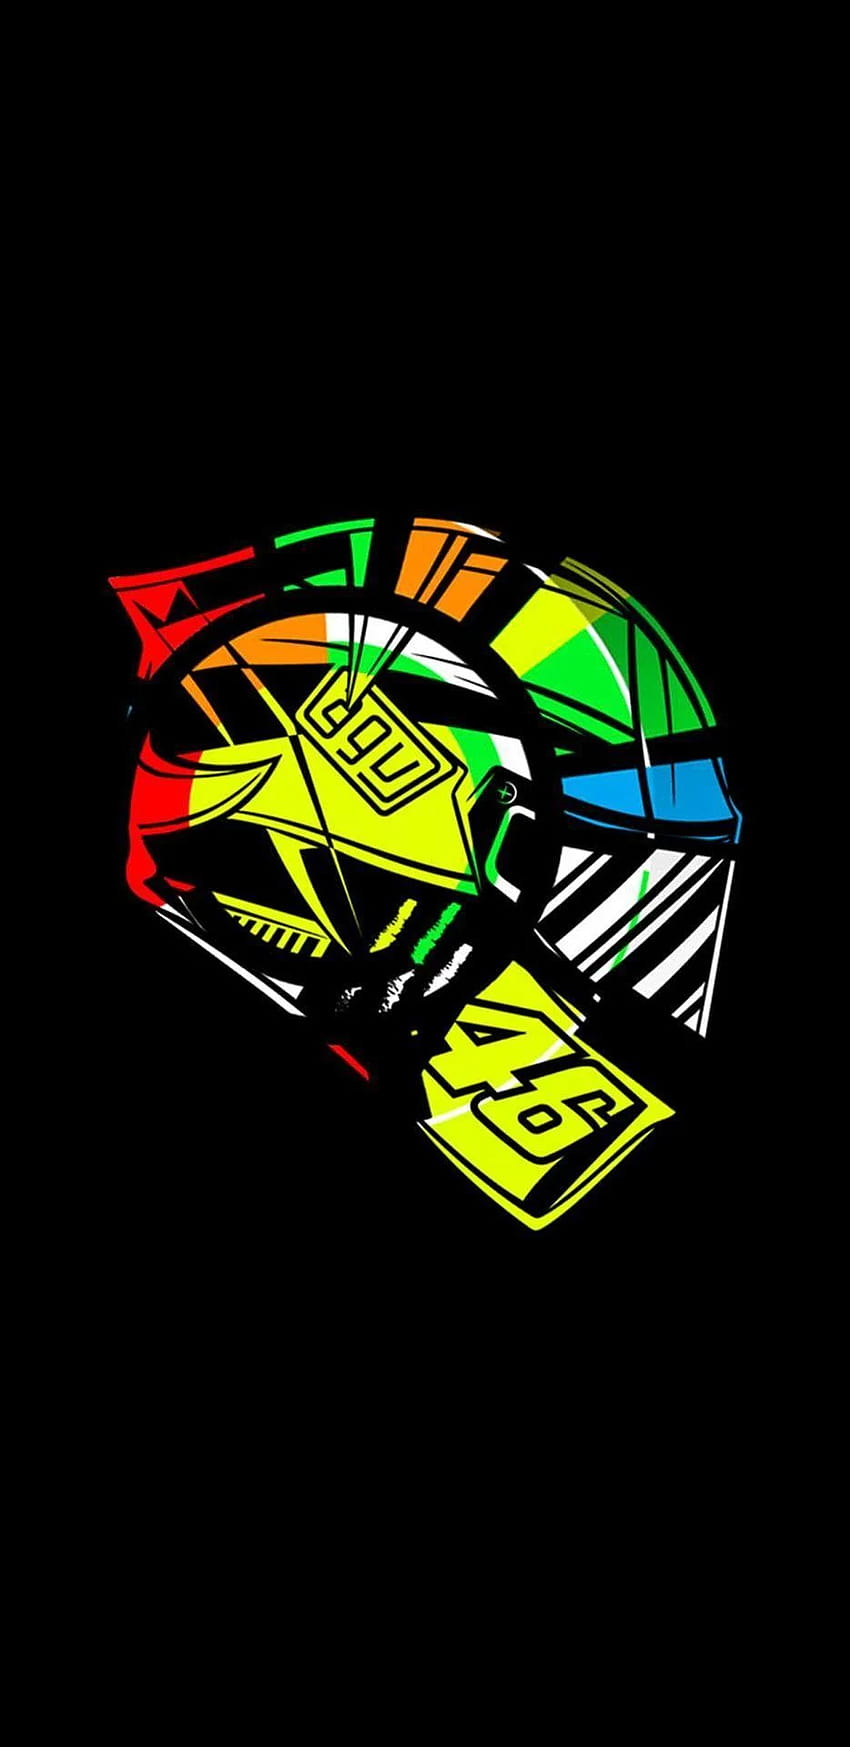 You All Know It... VR 46, vr 46 logo HD phone wallpaper